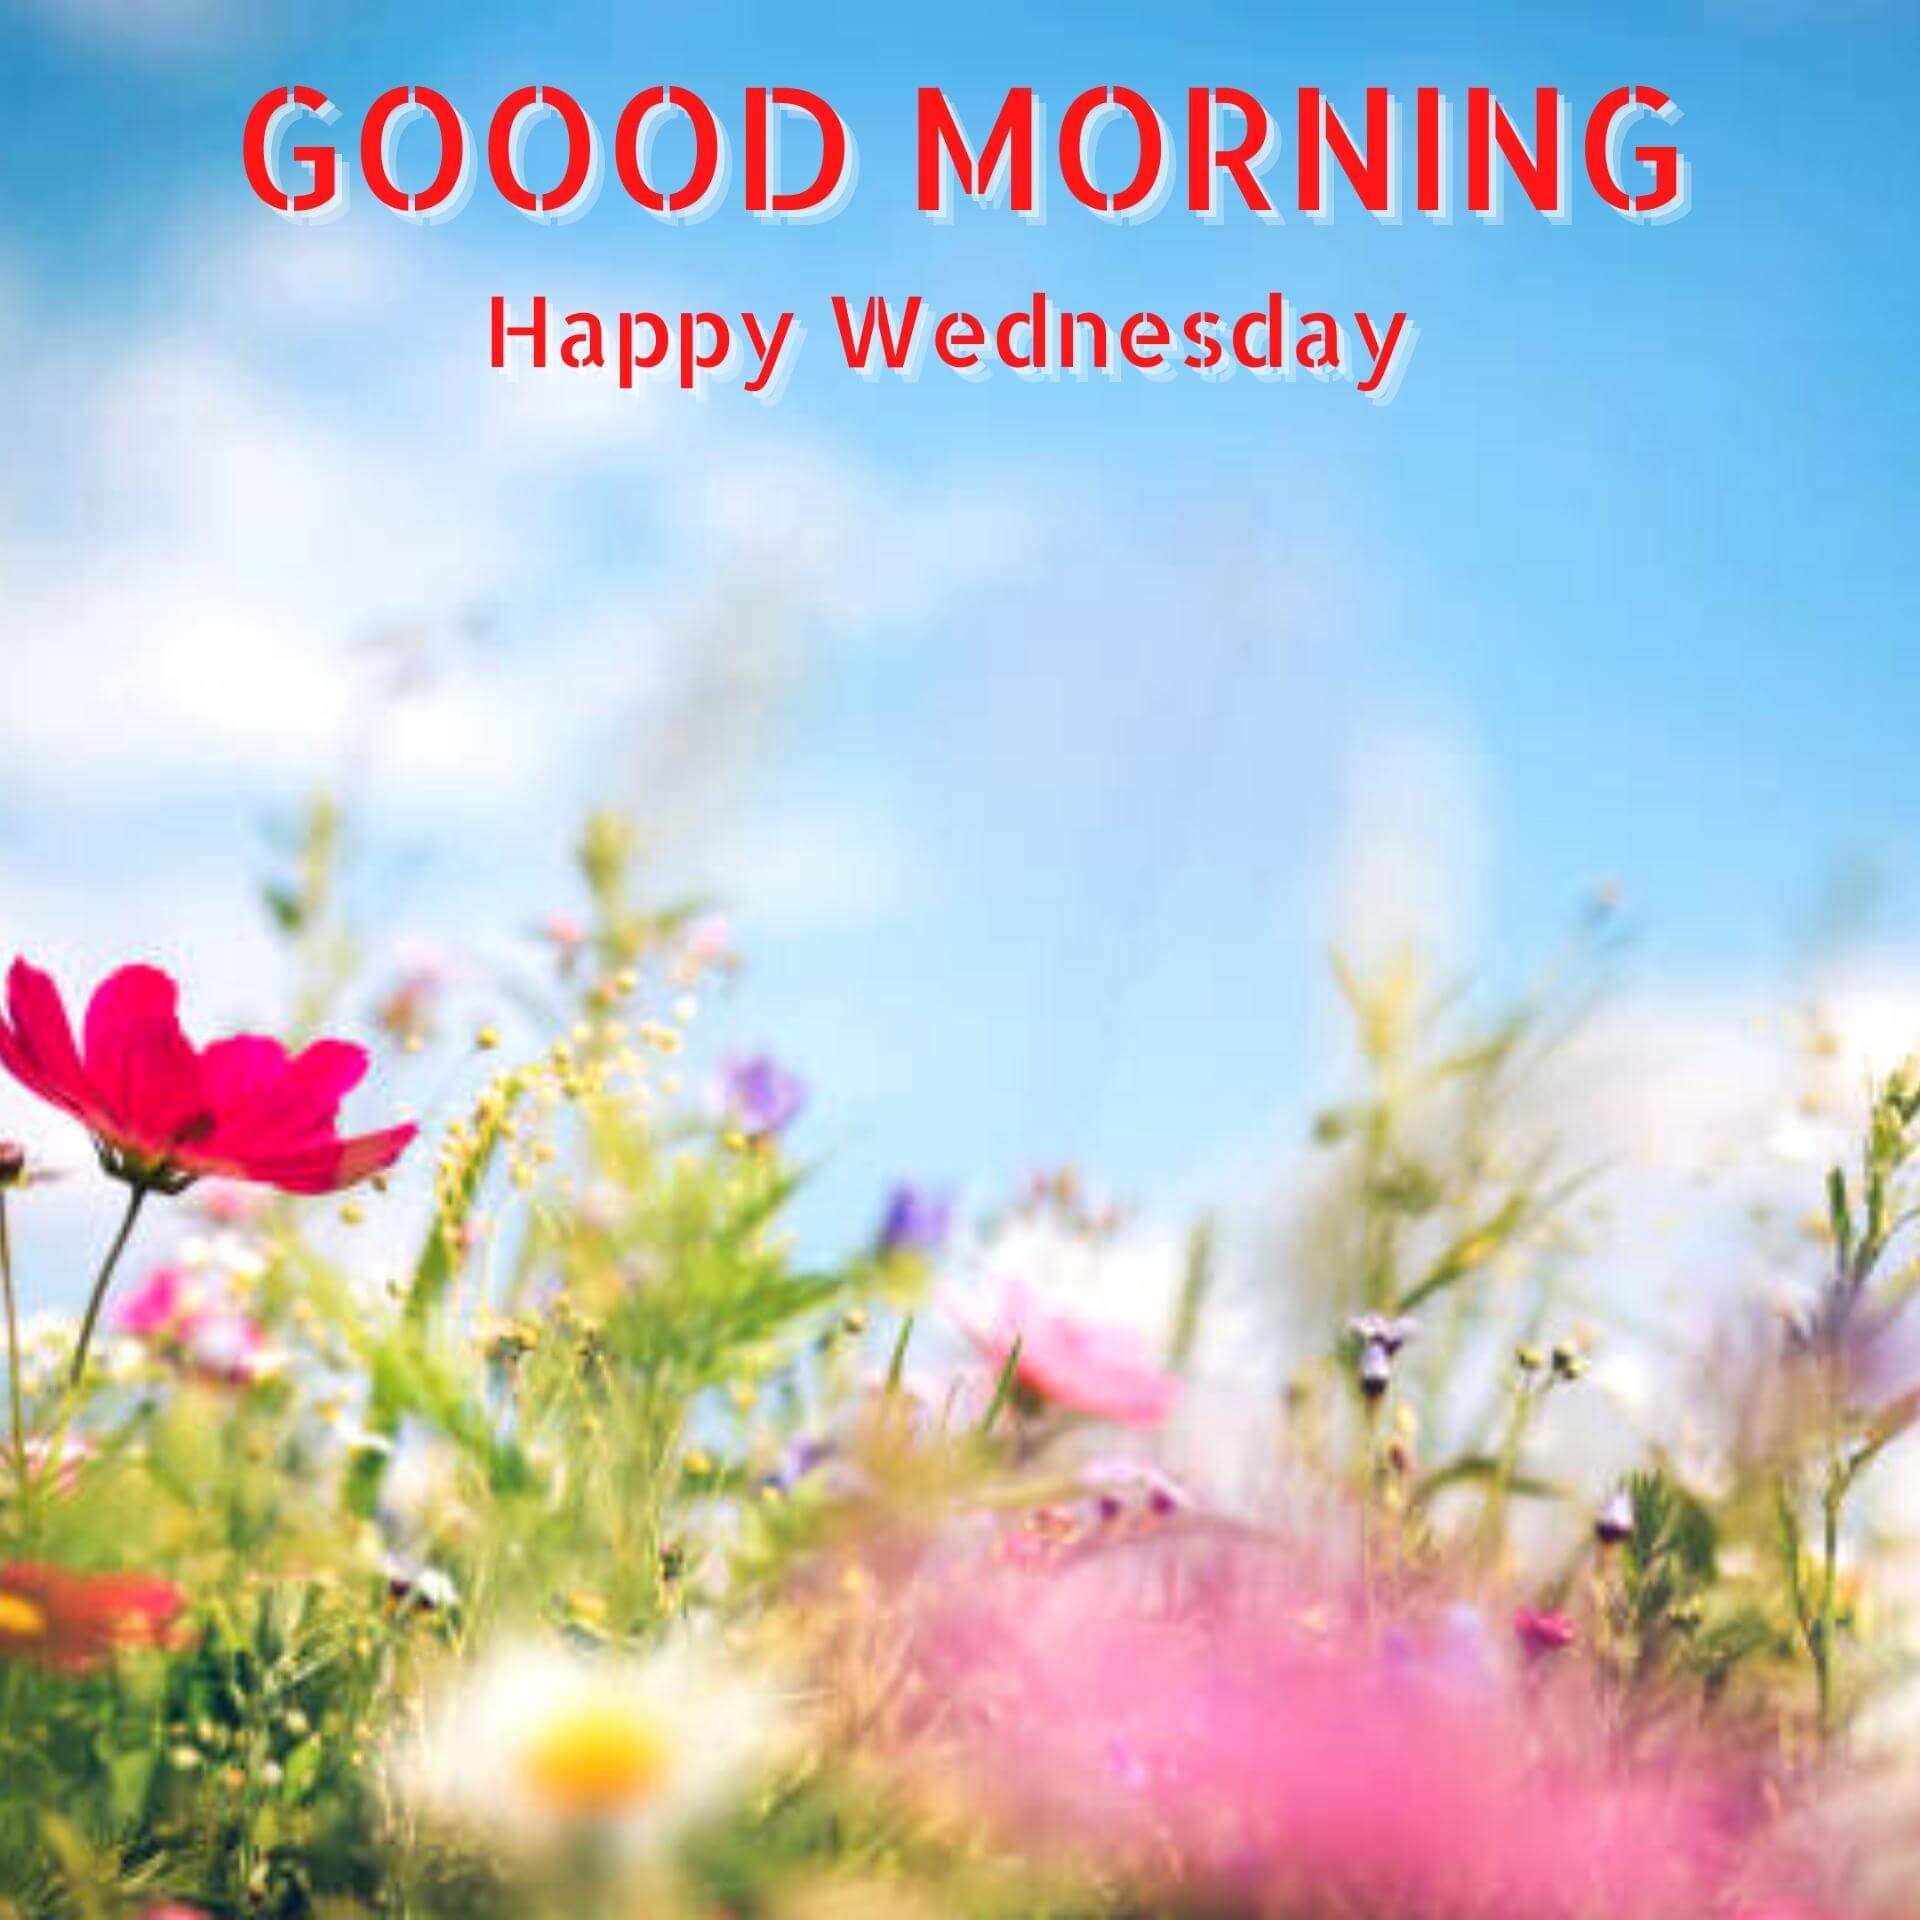 Wednesday good morning Wallpaper Pics Free Download